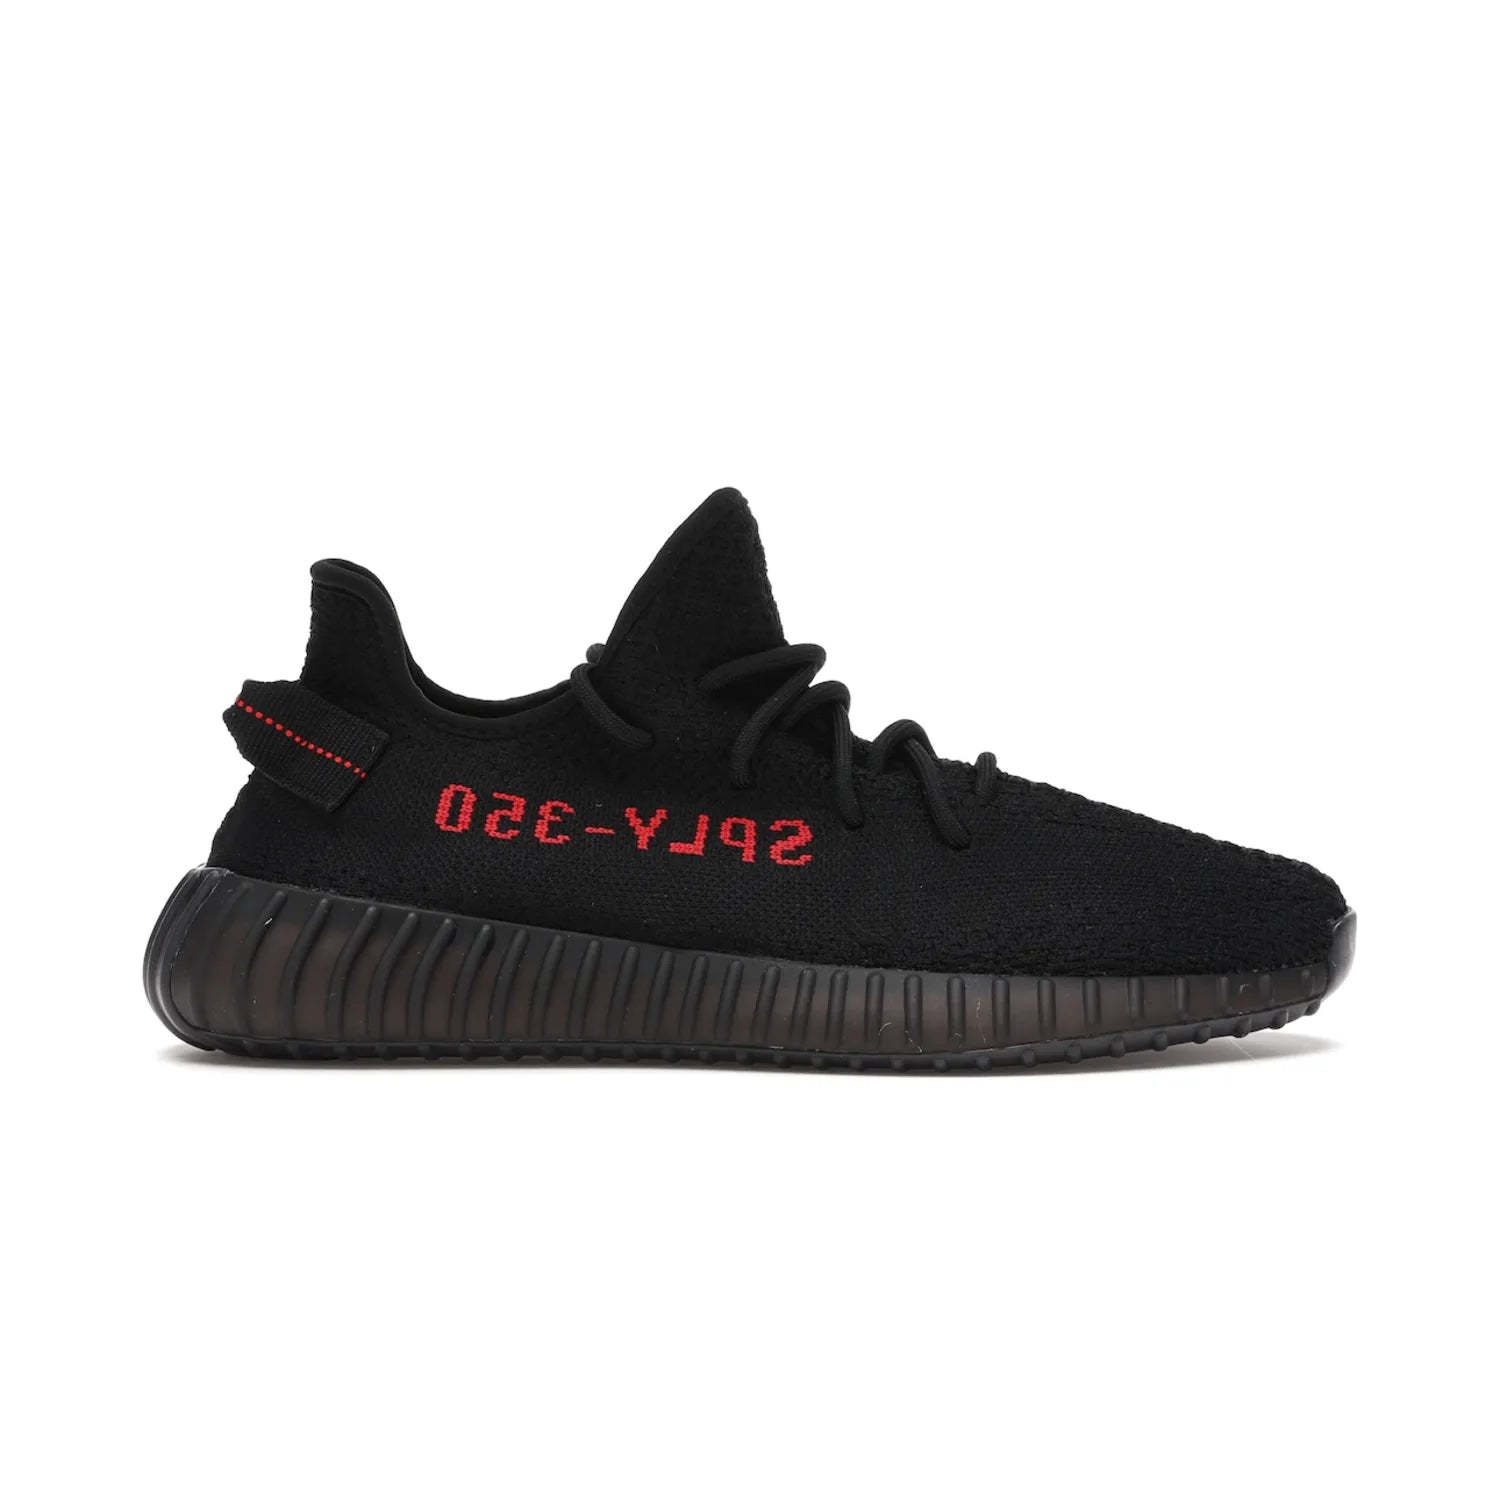 adidas Yeezy Boost 350 V2 Black Red (2017/2020) - Image 1 - Only at www.BallersClubKickz.com - Adidas Yeezy Boost 350 V2 Black Red: a classic colorway featuring black Primeknit upper, BOOST cushioning system, and iconic "SPLY-350" text. Released in 2017 for a retail price of $220.